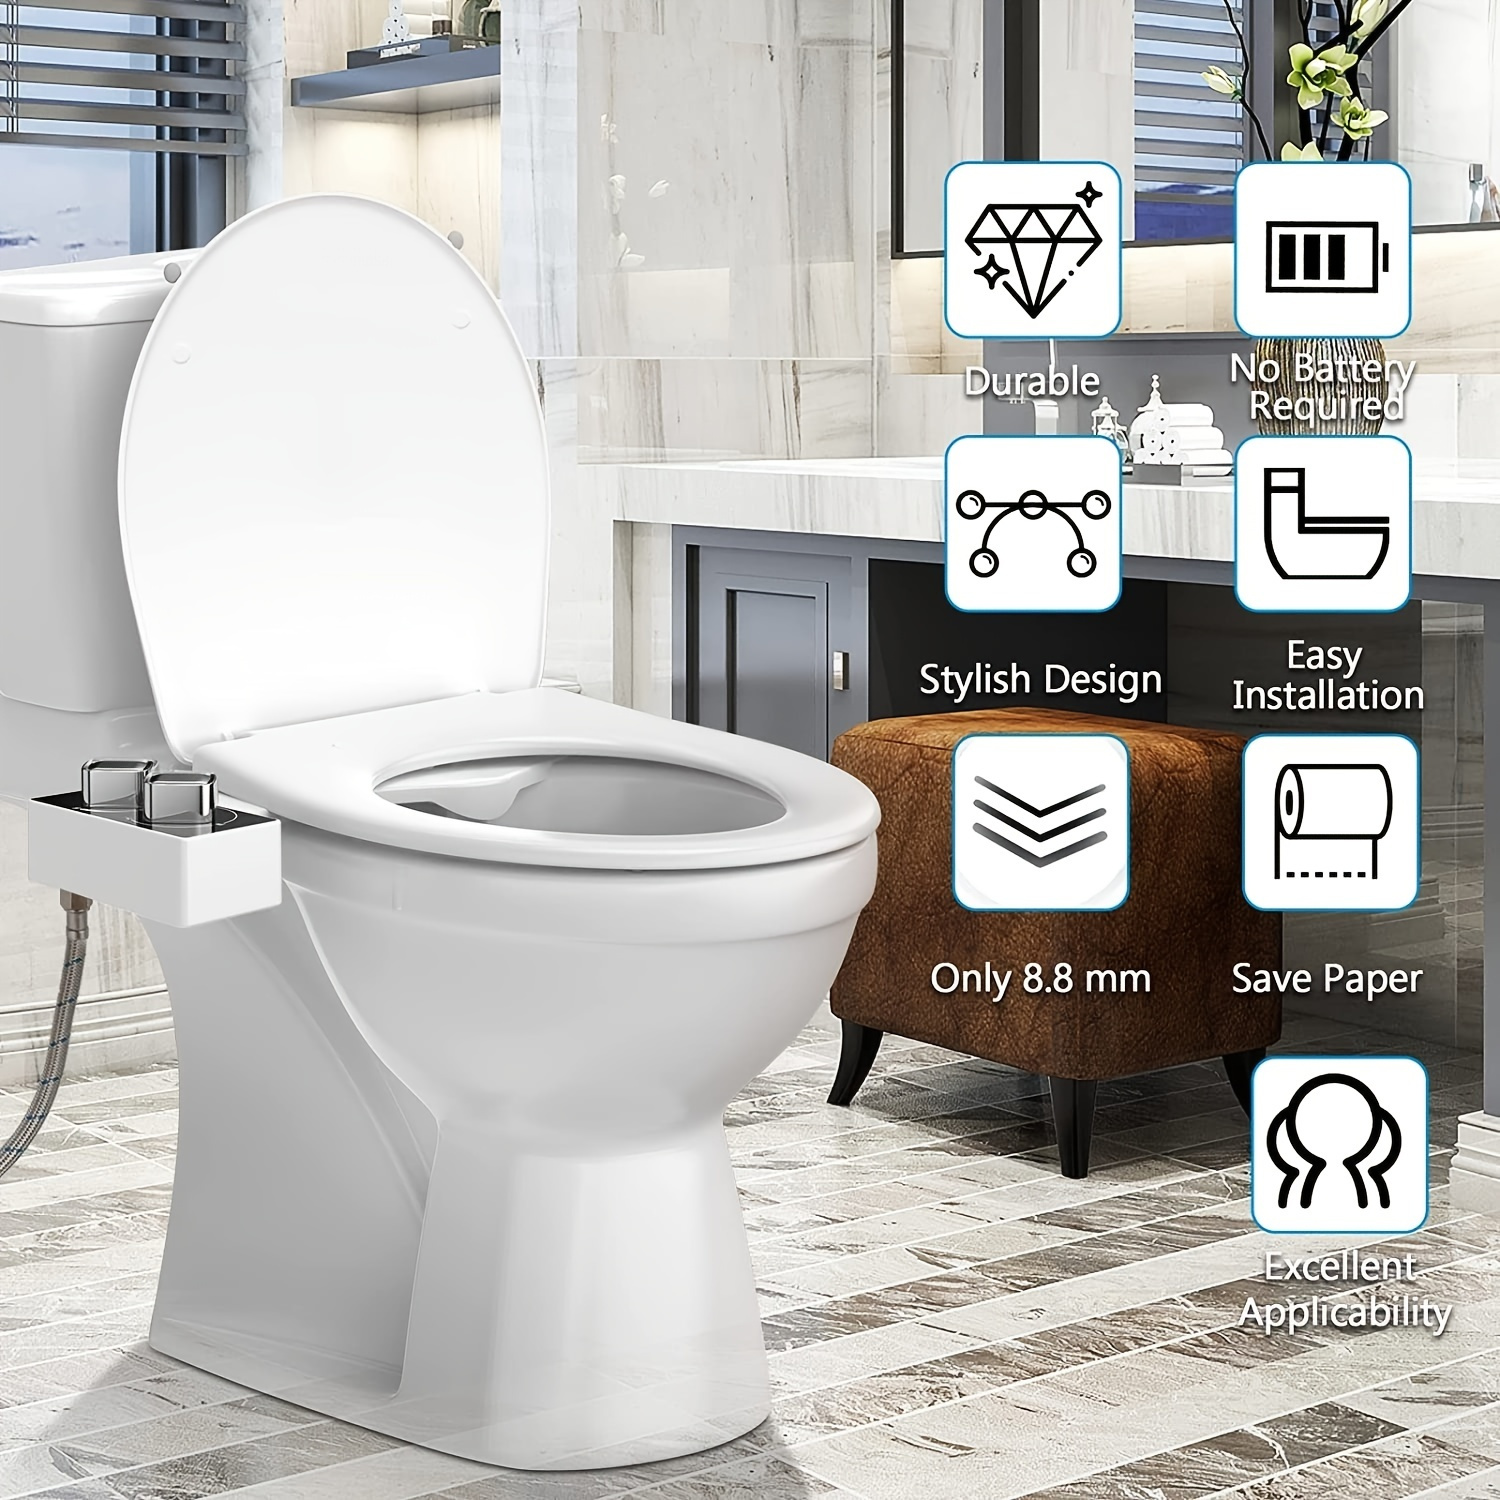 Heated Toilet Seat Cover Bathroom D Shape Soft Close Easy Install